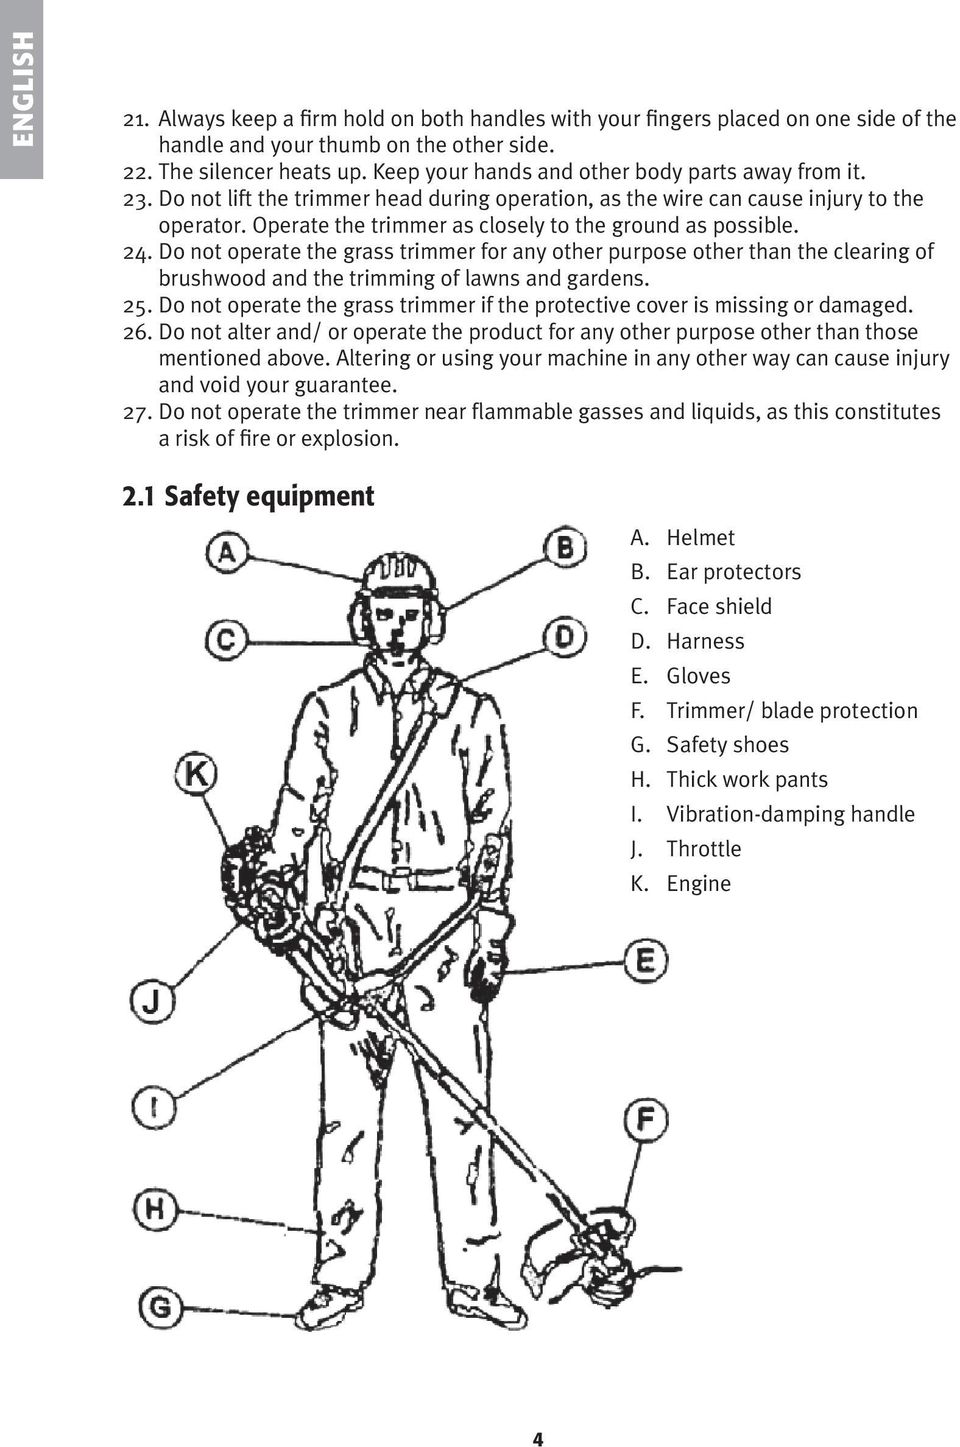 Operate the trimmer as closely to the ground as possible. 24. Do not operate the grass trimmer for any other purpose other than the clearing of brushwood and the trimming of lawns and gardens. 25.